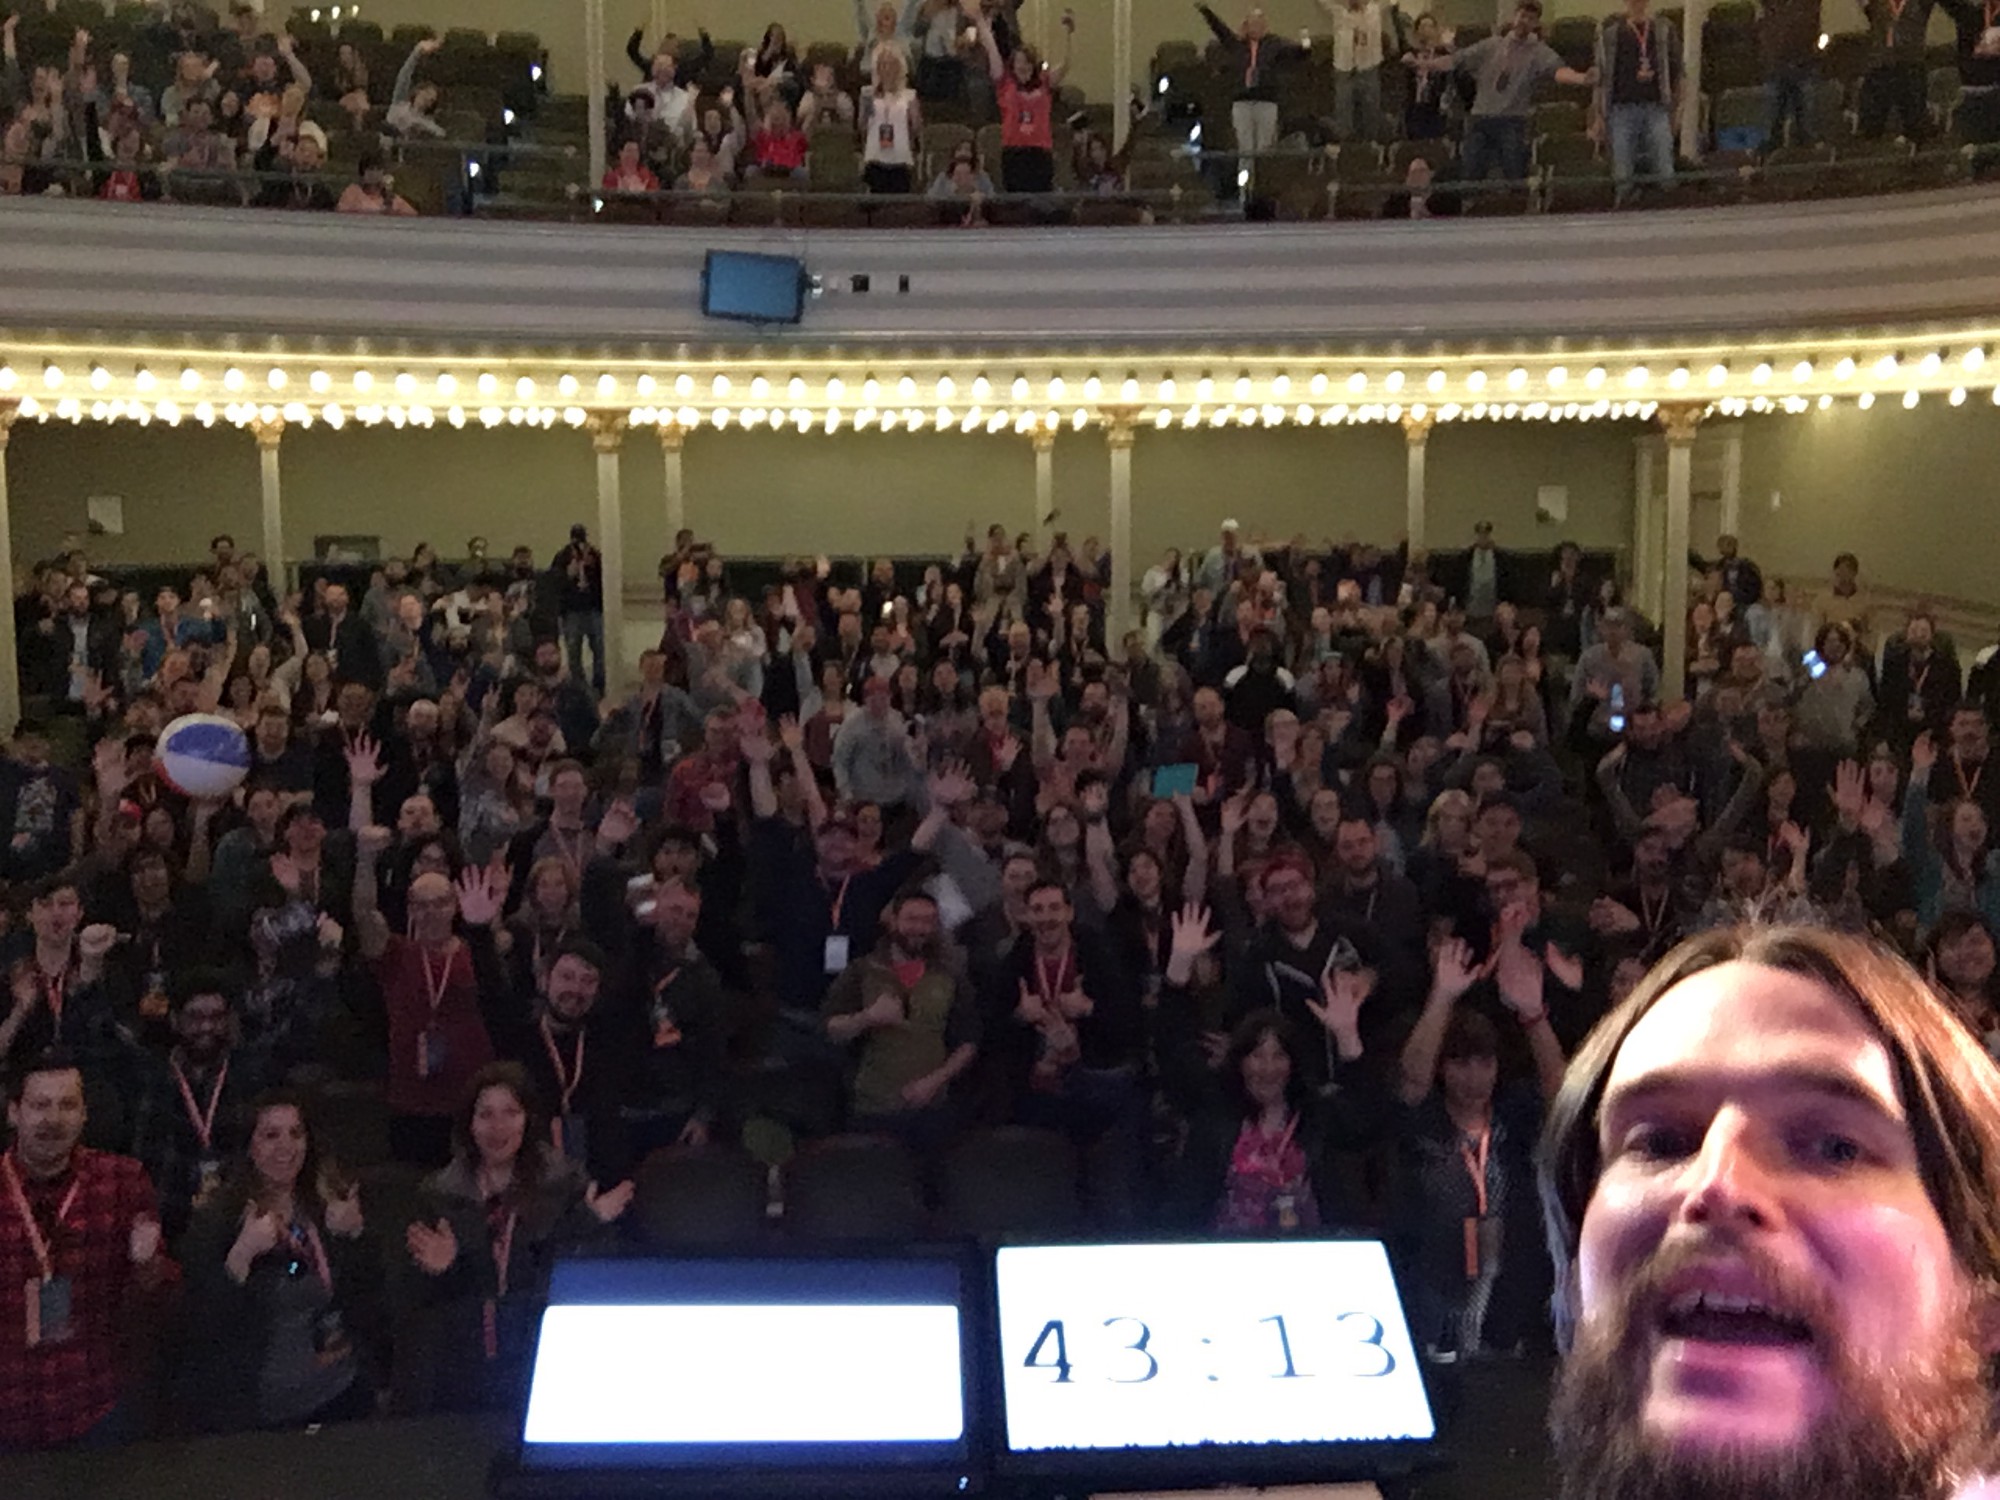 Photo of a selfie I took on stage with an excited audience in background